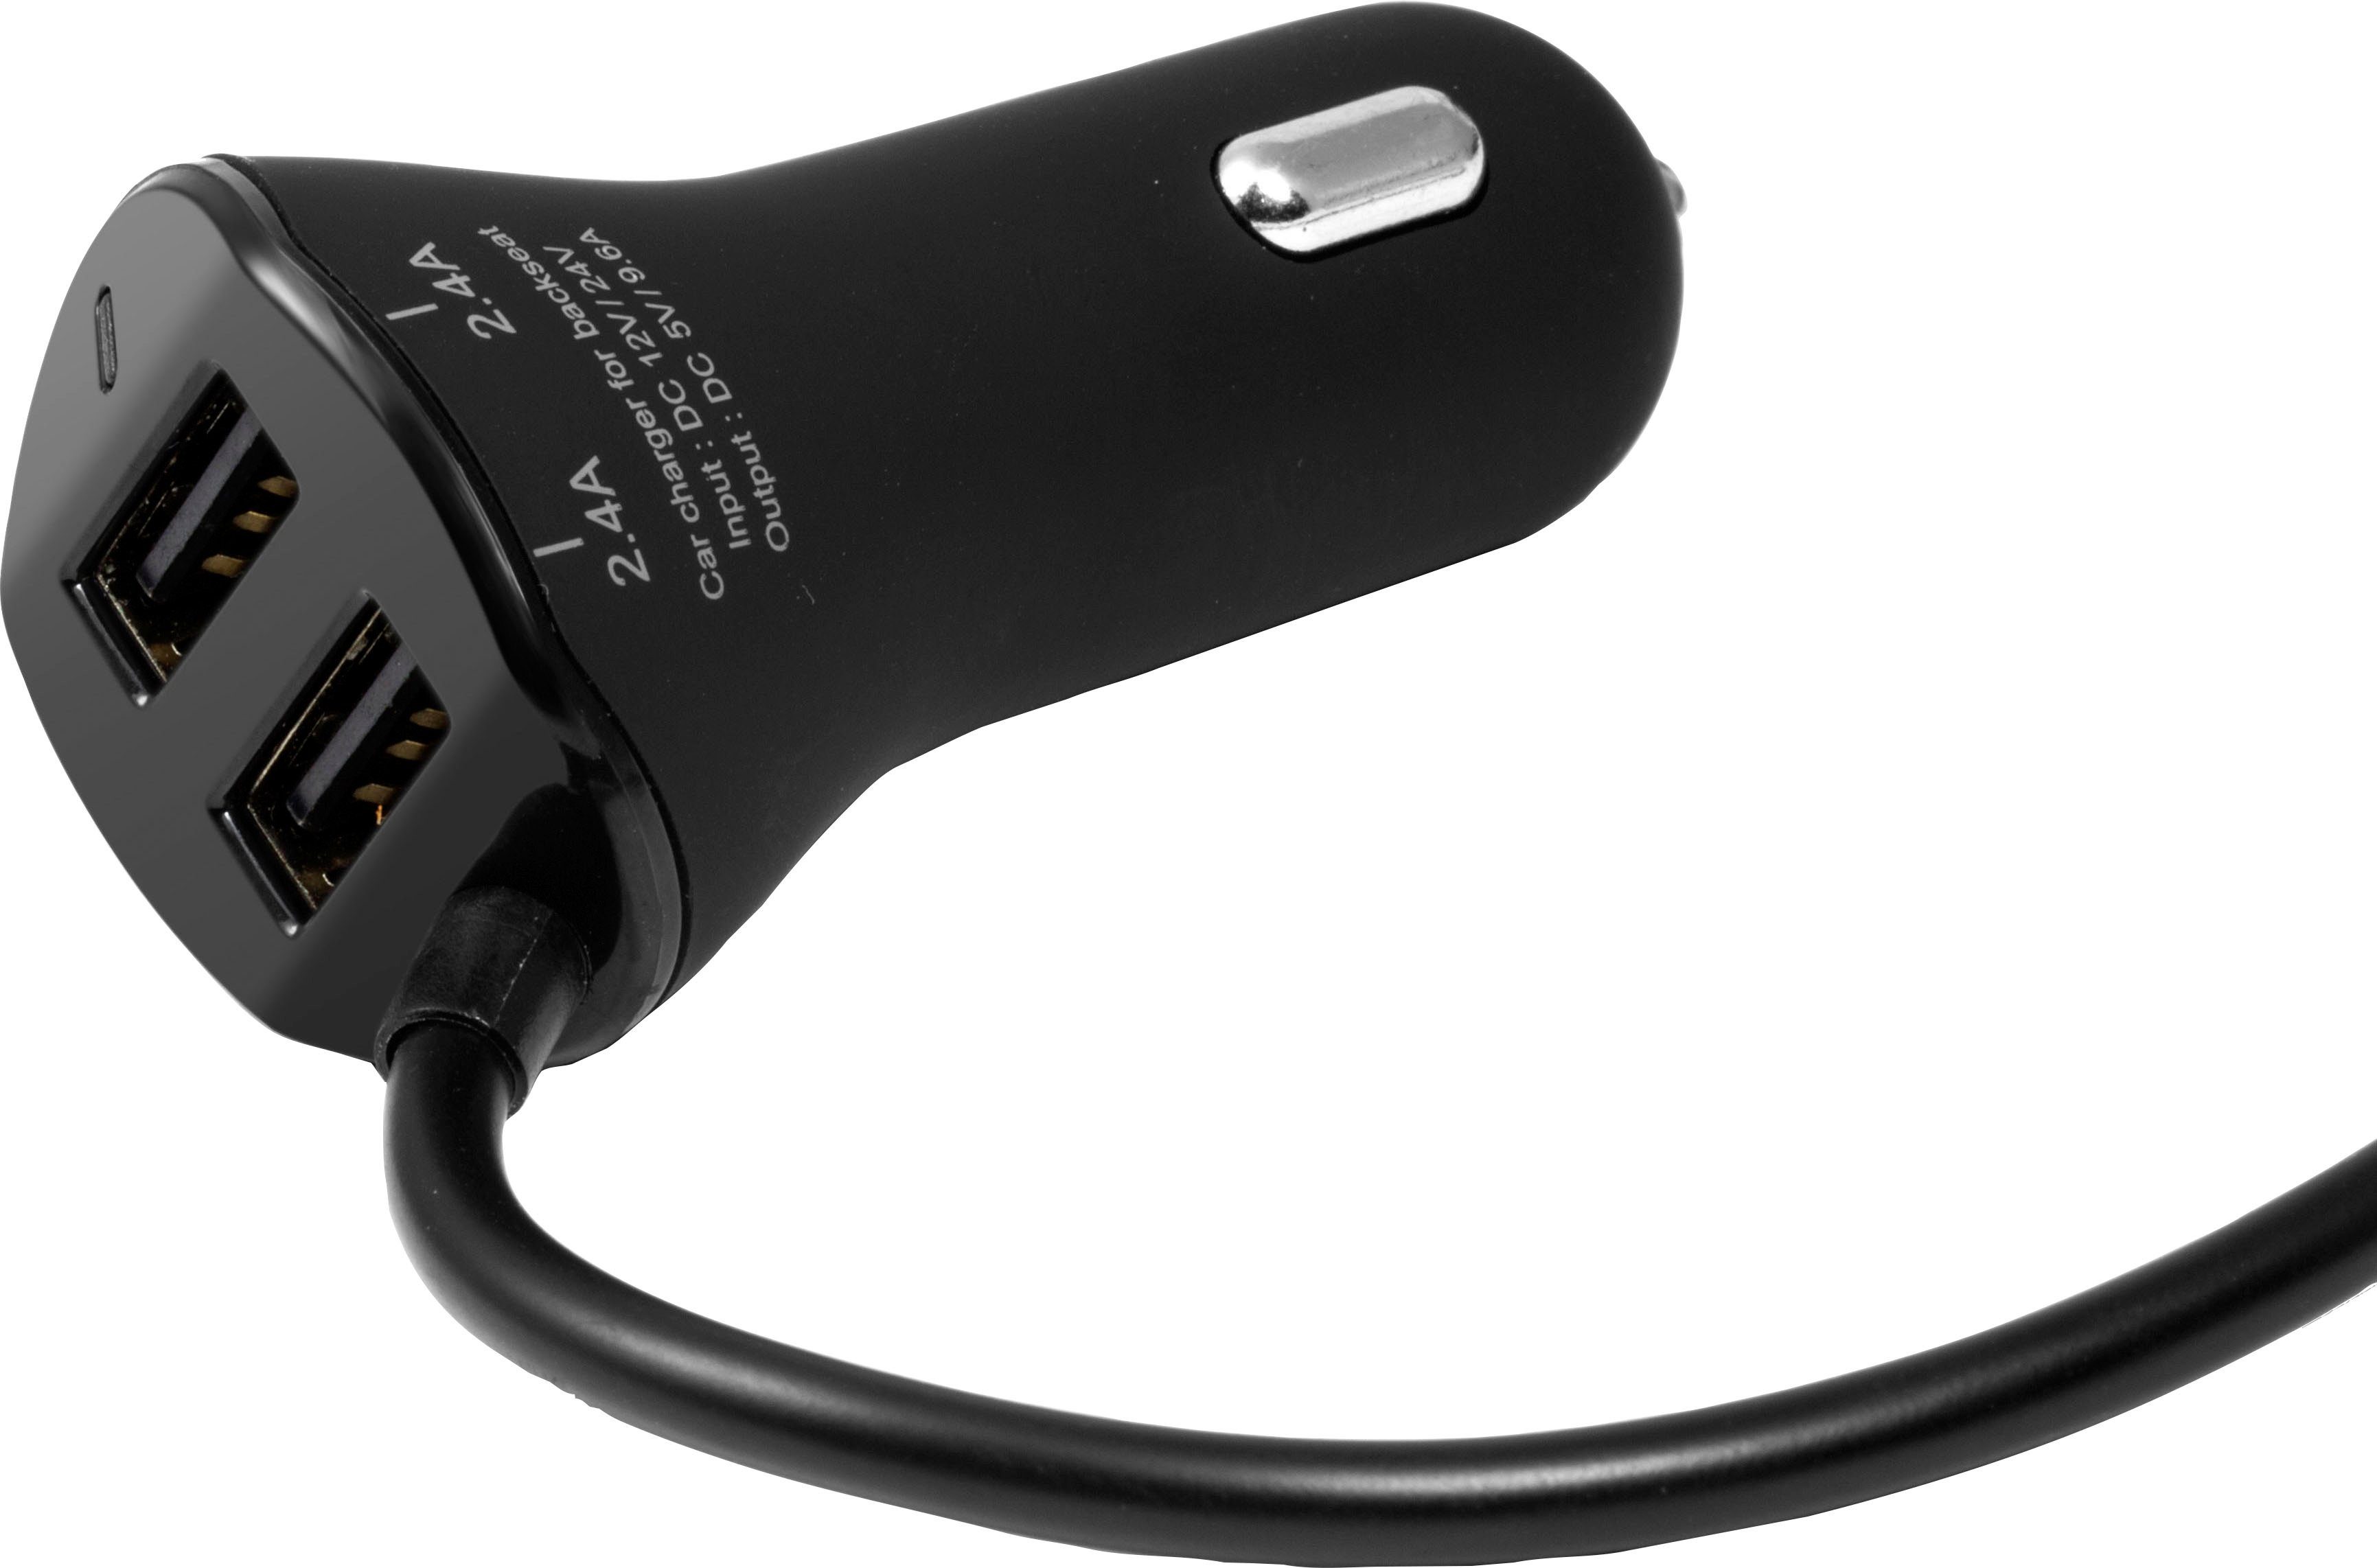 Technaxx Car Charger Family KFZ-Adapter TE14